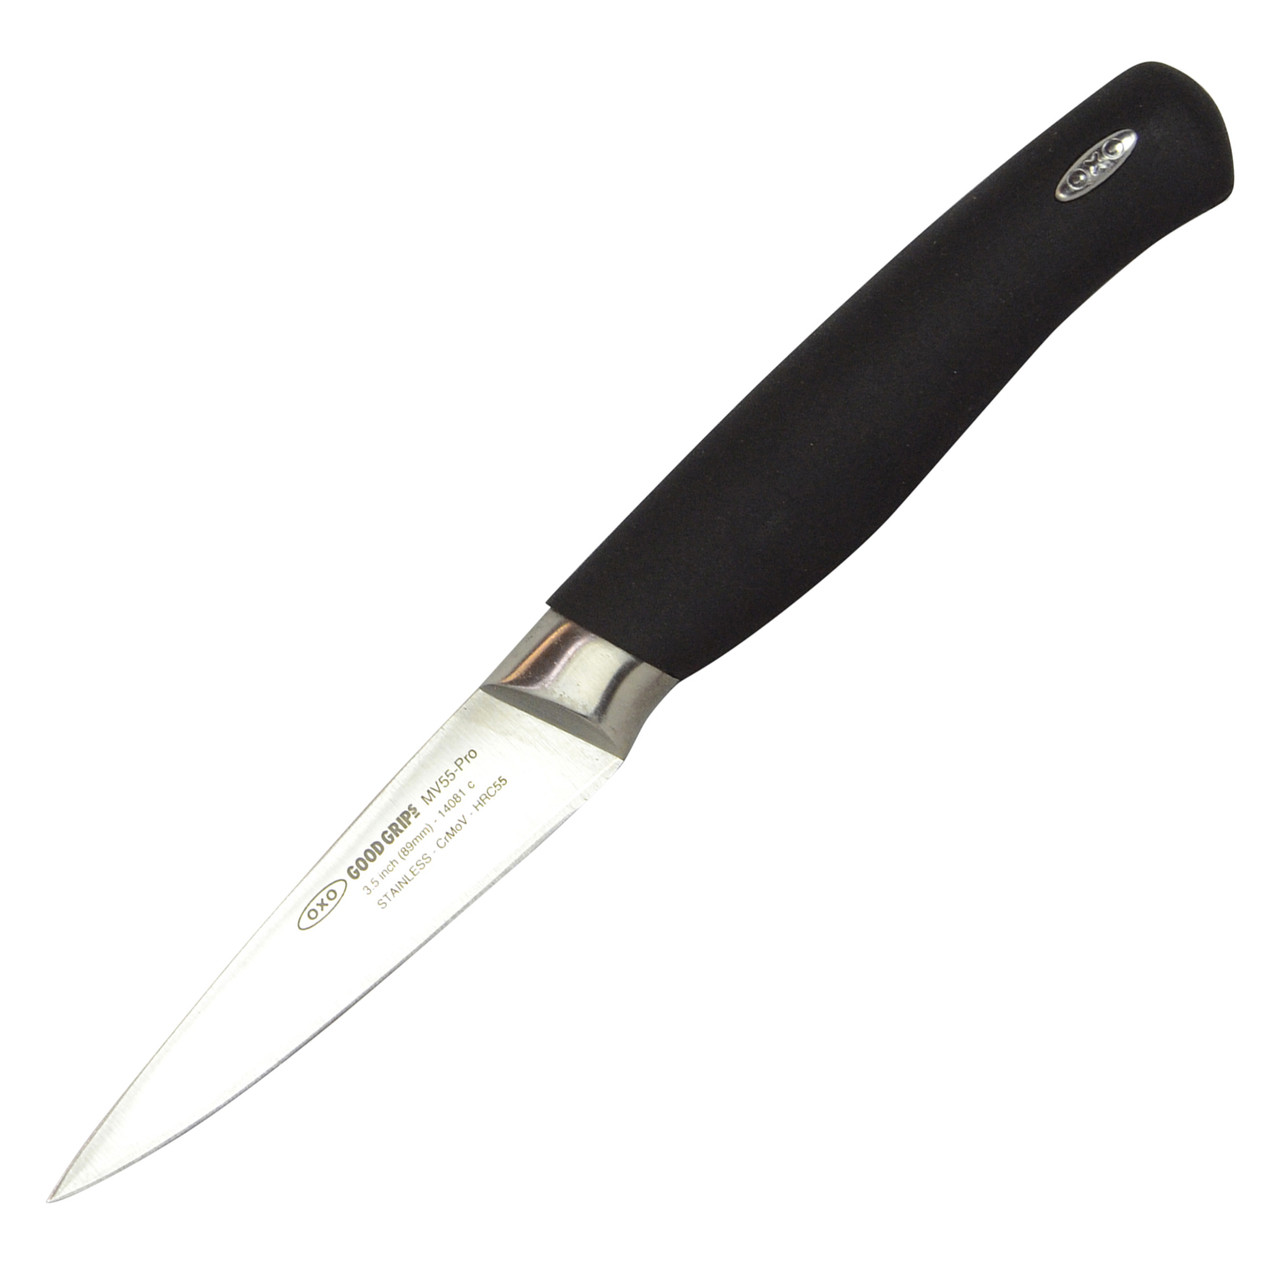 OXO Good Grips 3.5” Paring Knife